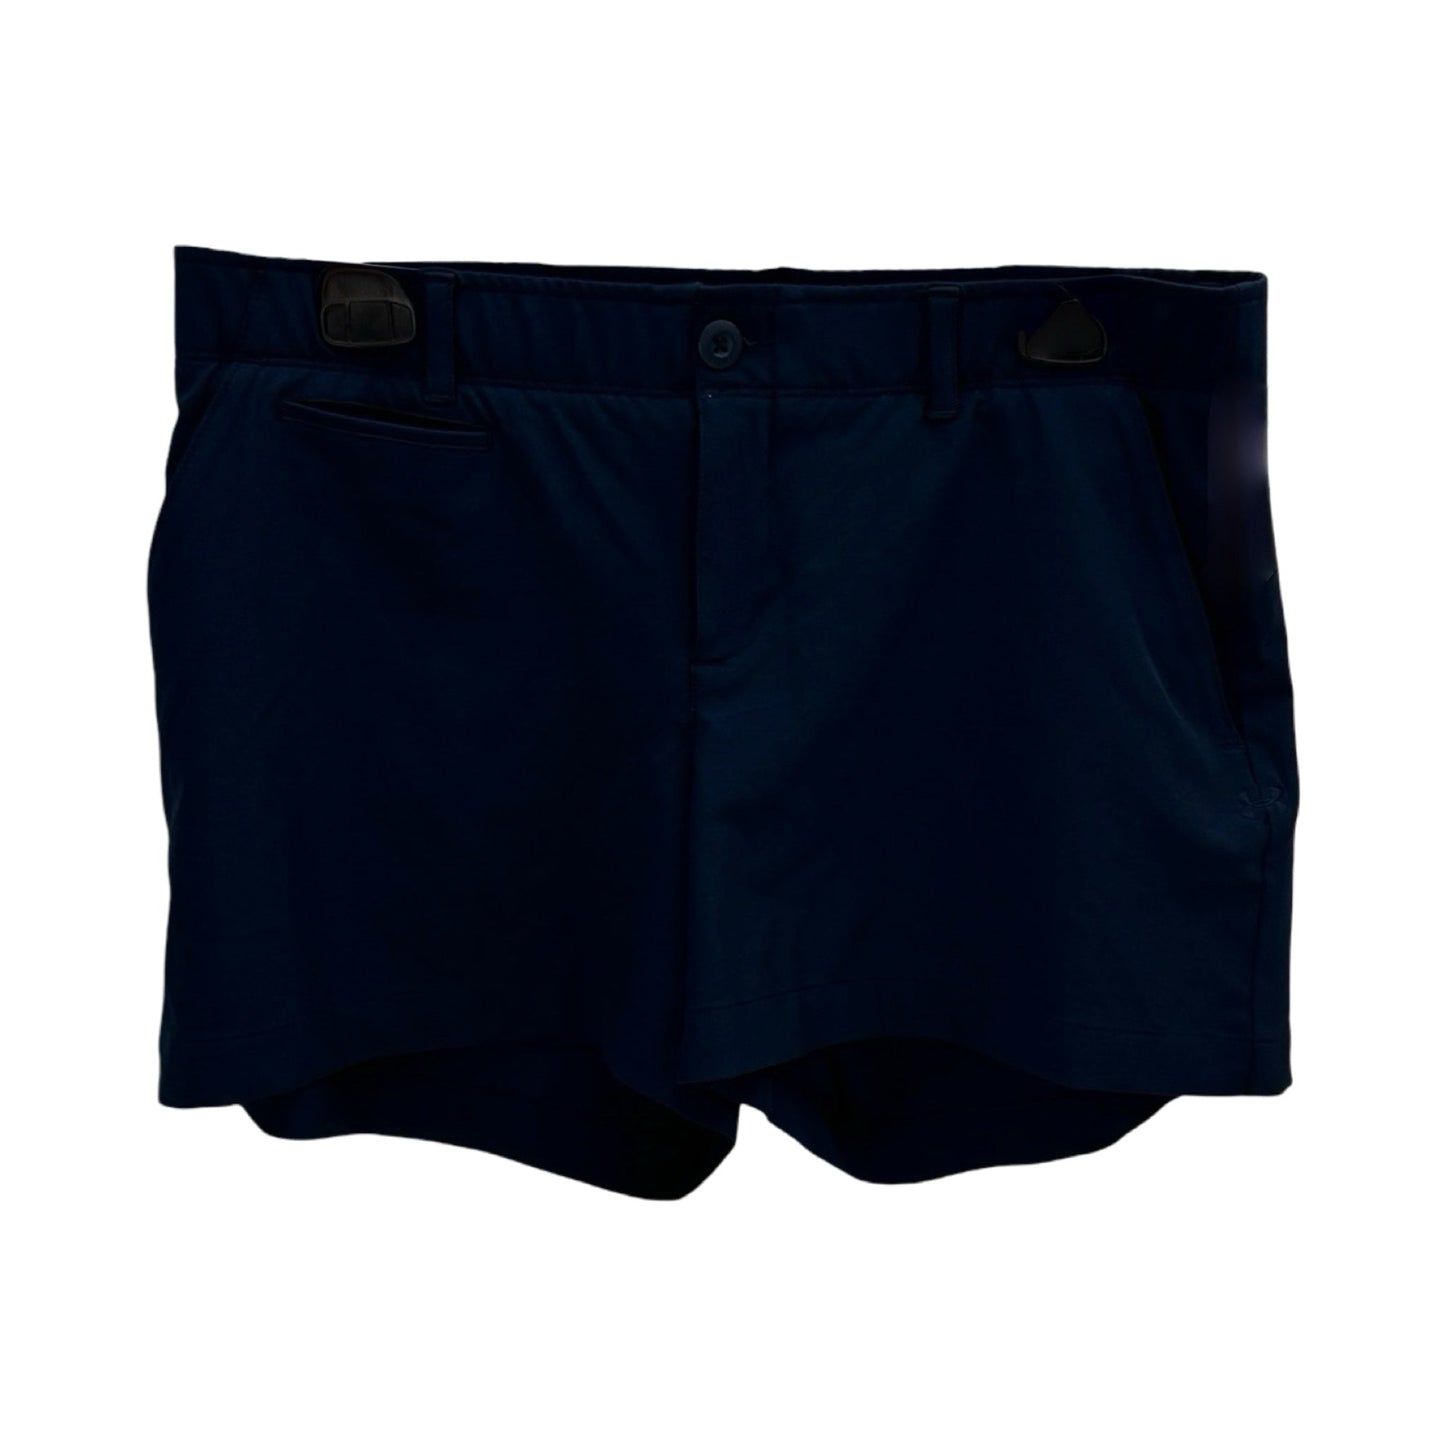 Navy Athletic Shorts Under Armour, Size 10